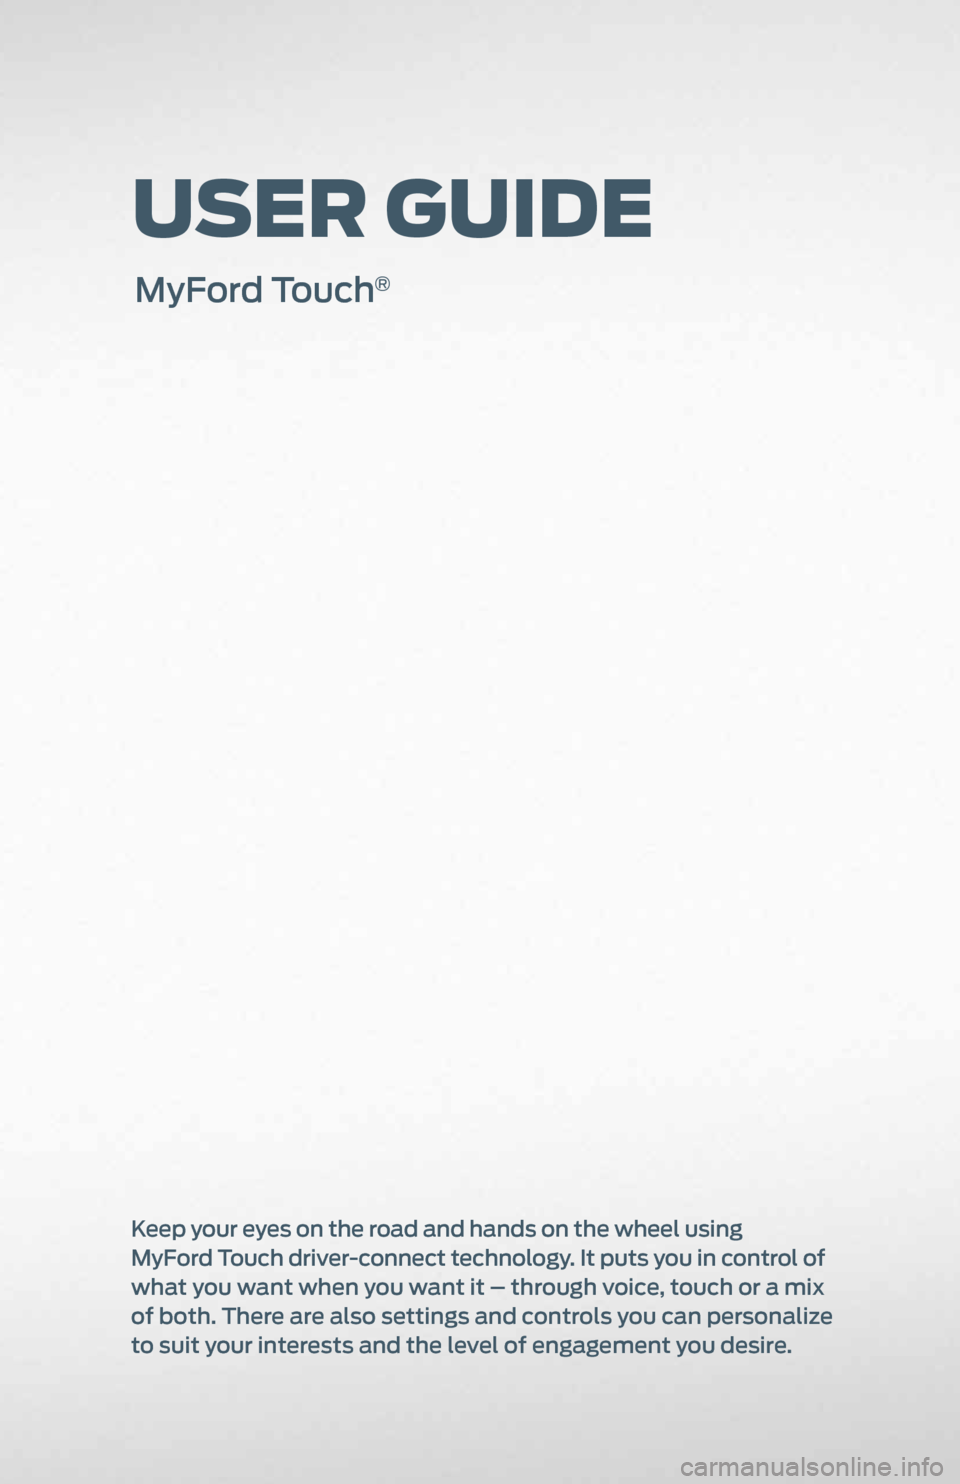 FORD EXPLORER 2011 5.G MyFord Touch User Guide User GUide
MyFord Touch®
Keep your eyes on the road and hands on the wheel using   
MyFord Touch driver-connect technology. It puts you in control of 
what you want when you want it – through voice